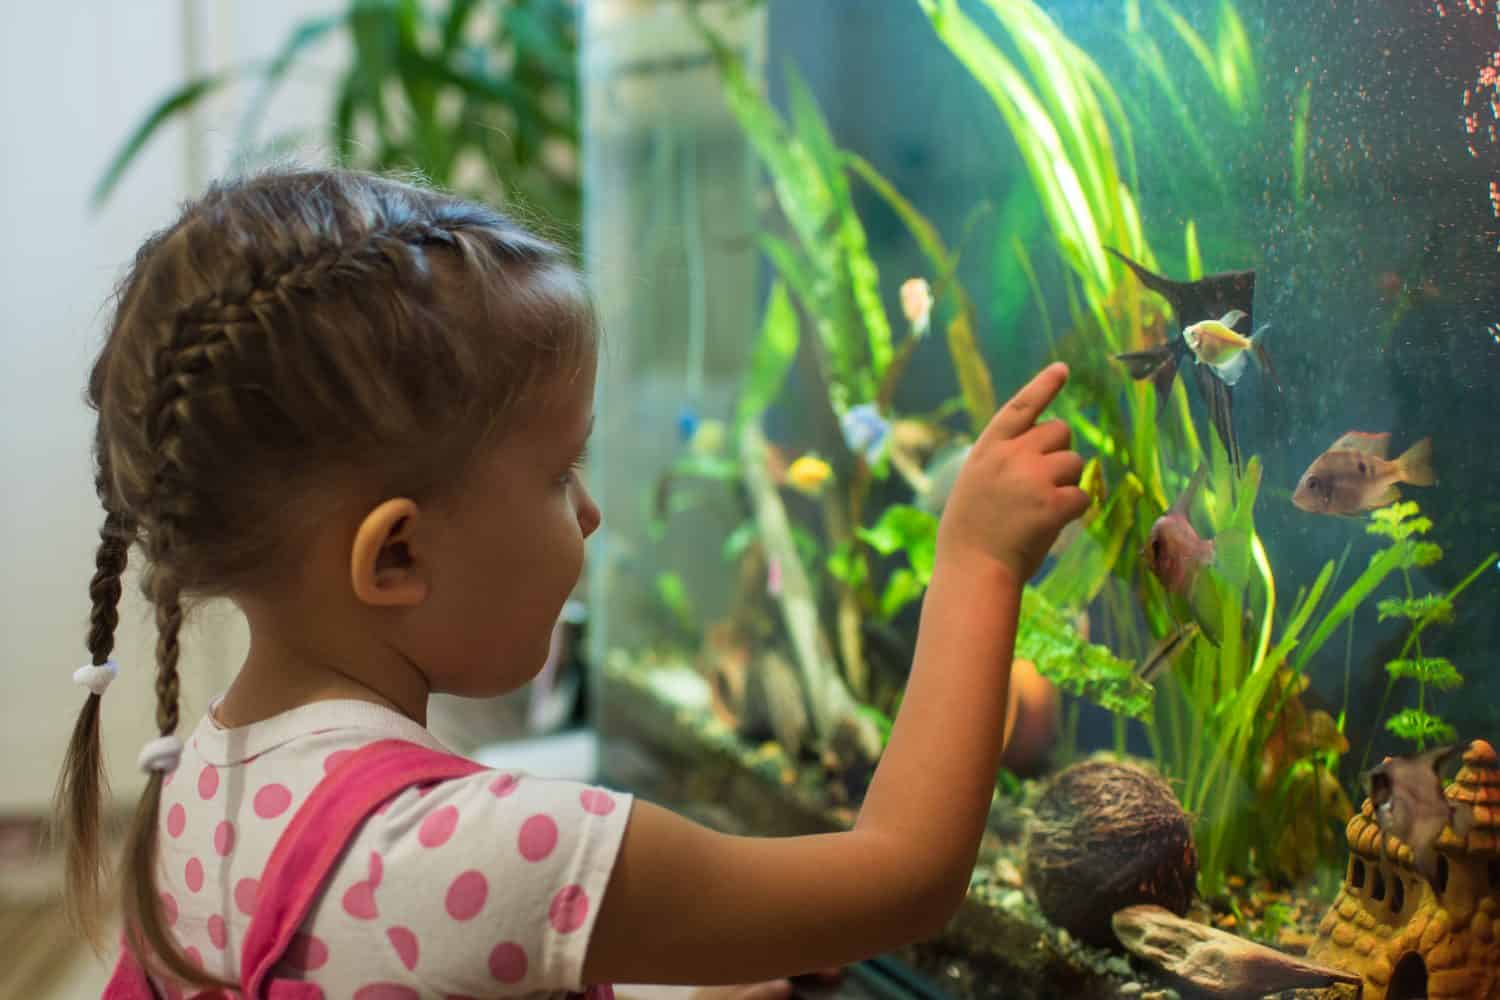 Little girl child looks at the fish angelfish in the aquarium